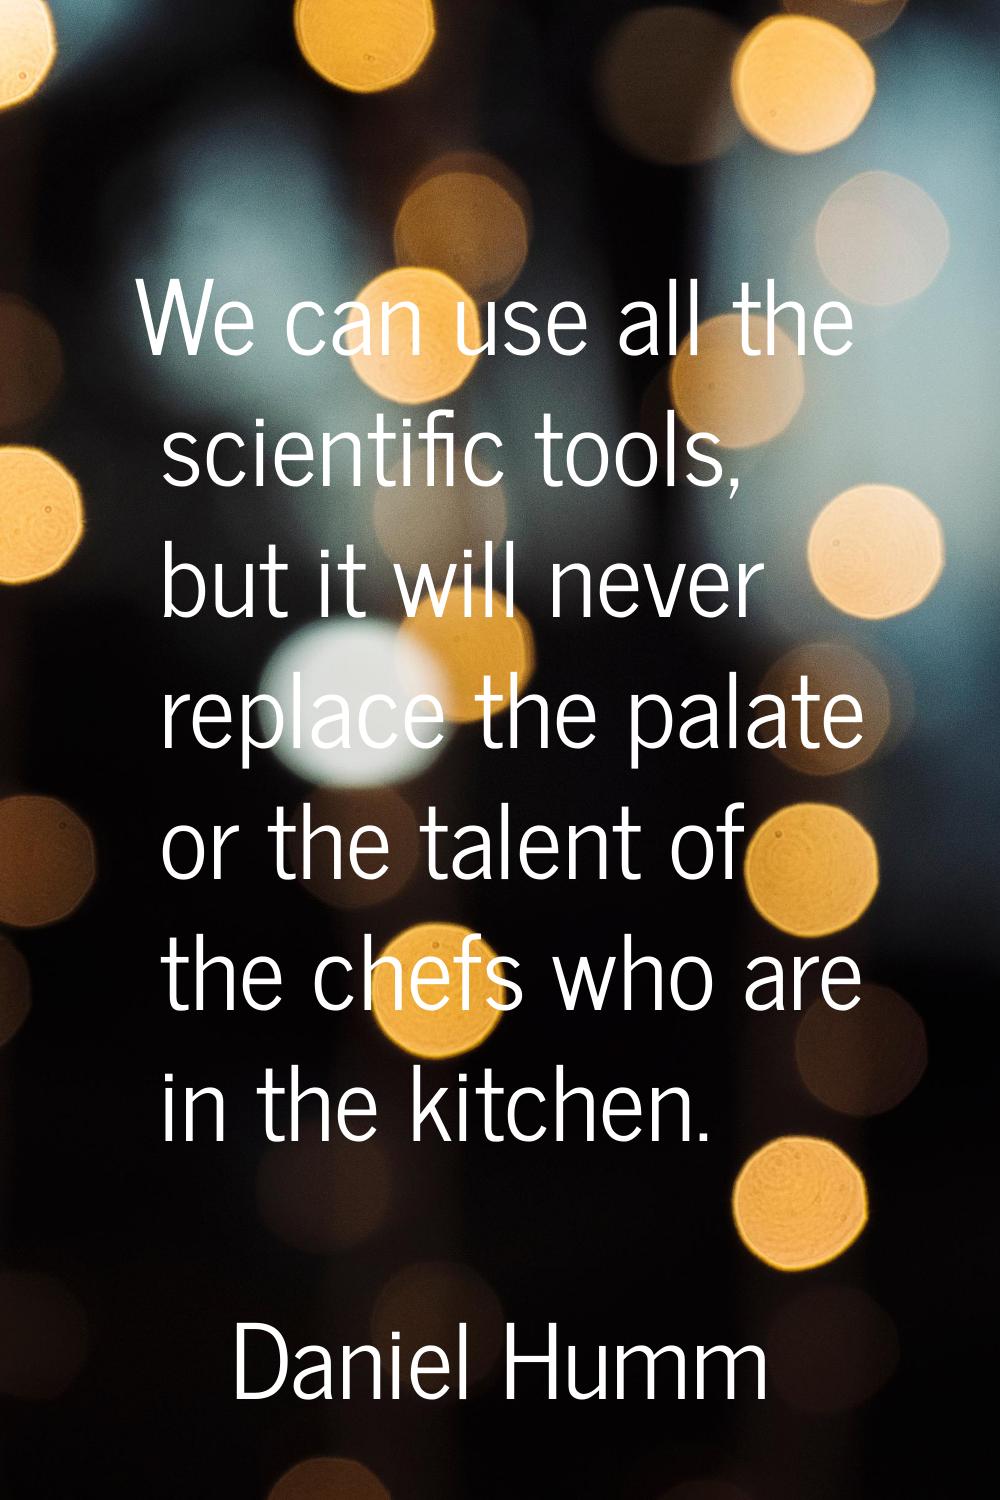 We can use all the scientific tools, but it will never replace the palate or the talent of the chef